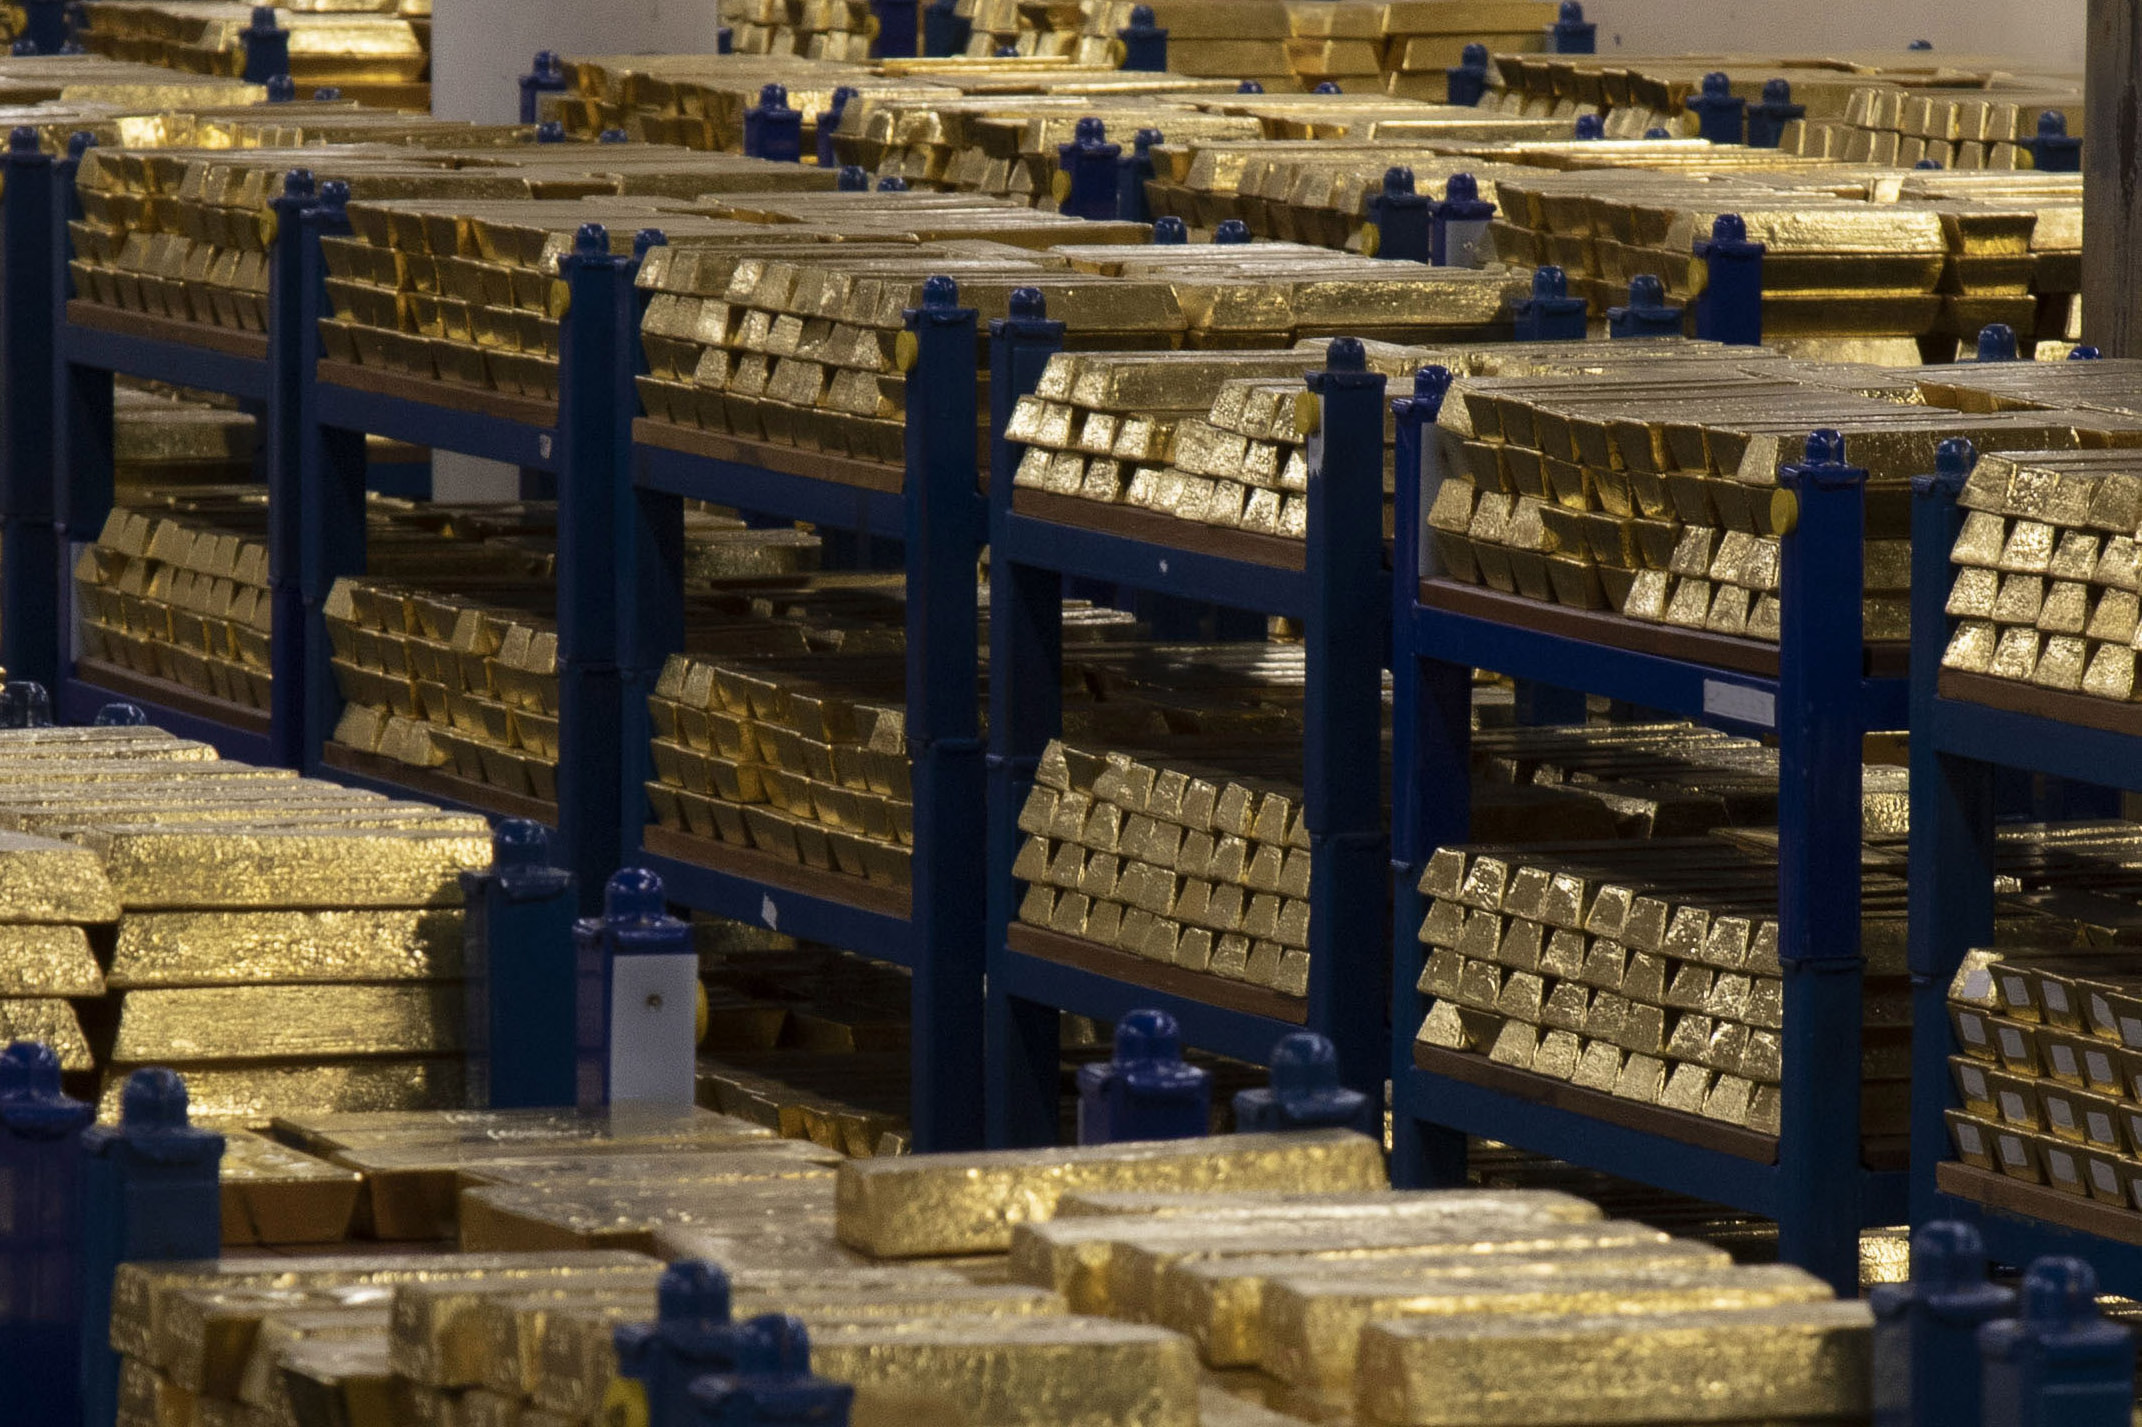 Bank of England Gold Vaults _ Bank of England _ Flickr